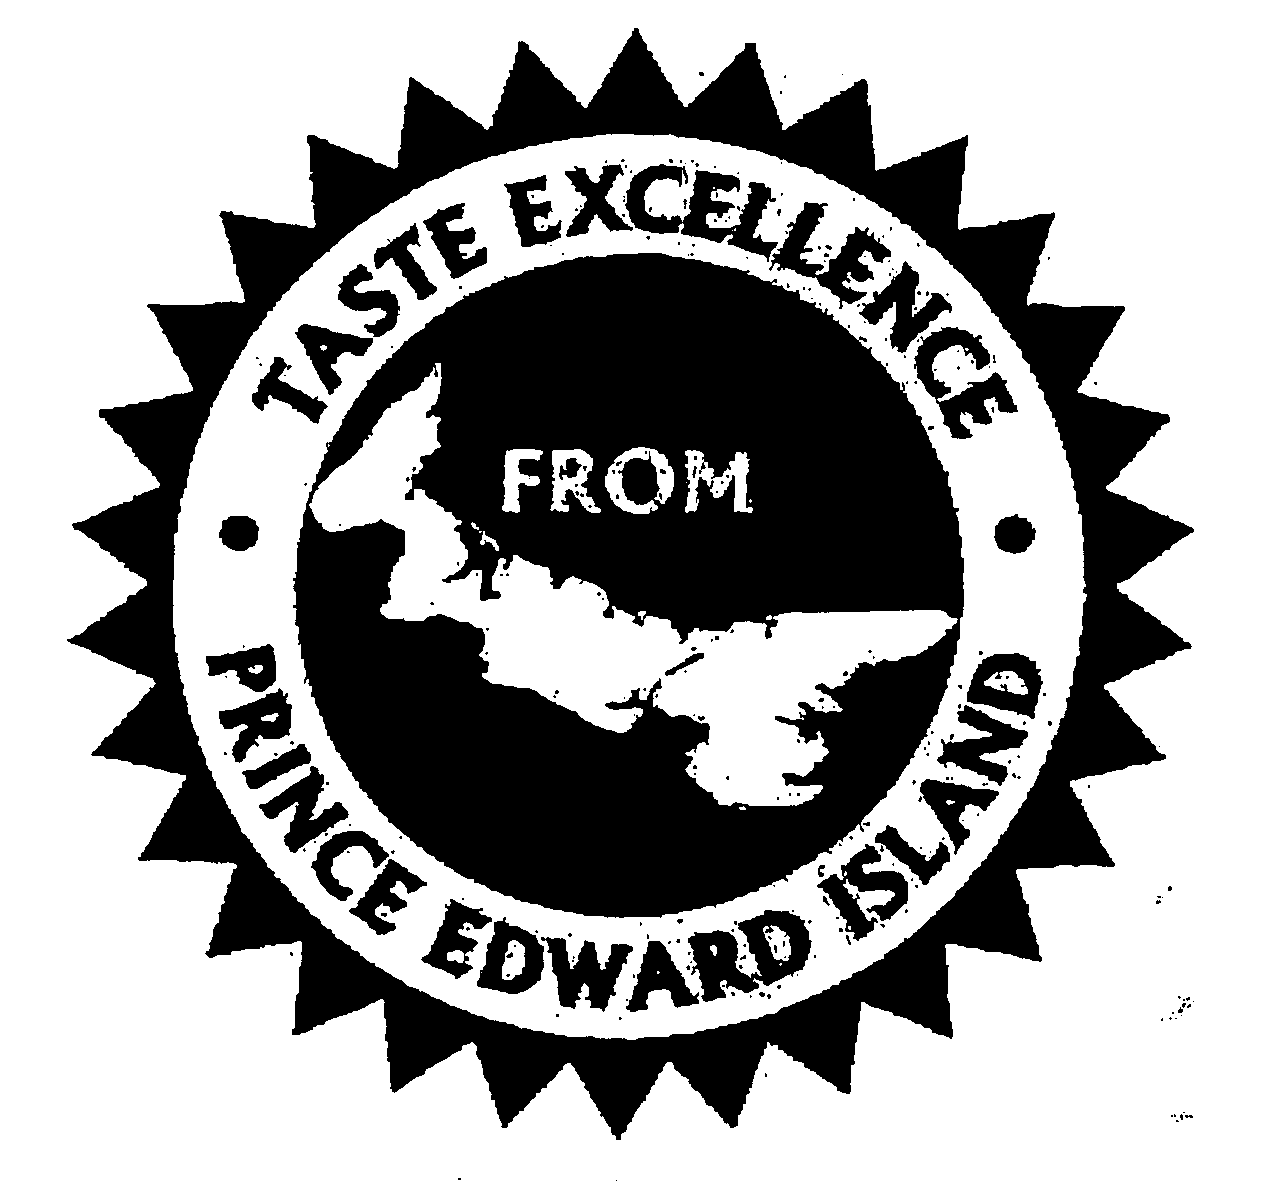  TASTE EXCELLENCE FROM PRINCE EDWARD ISLAND